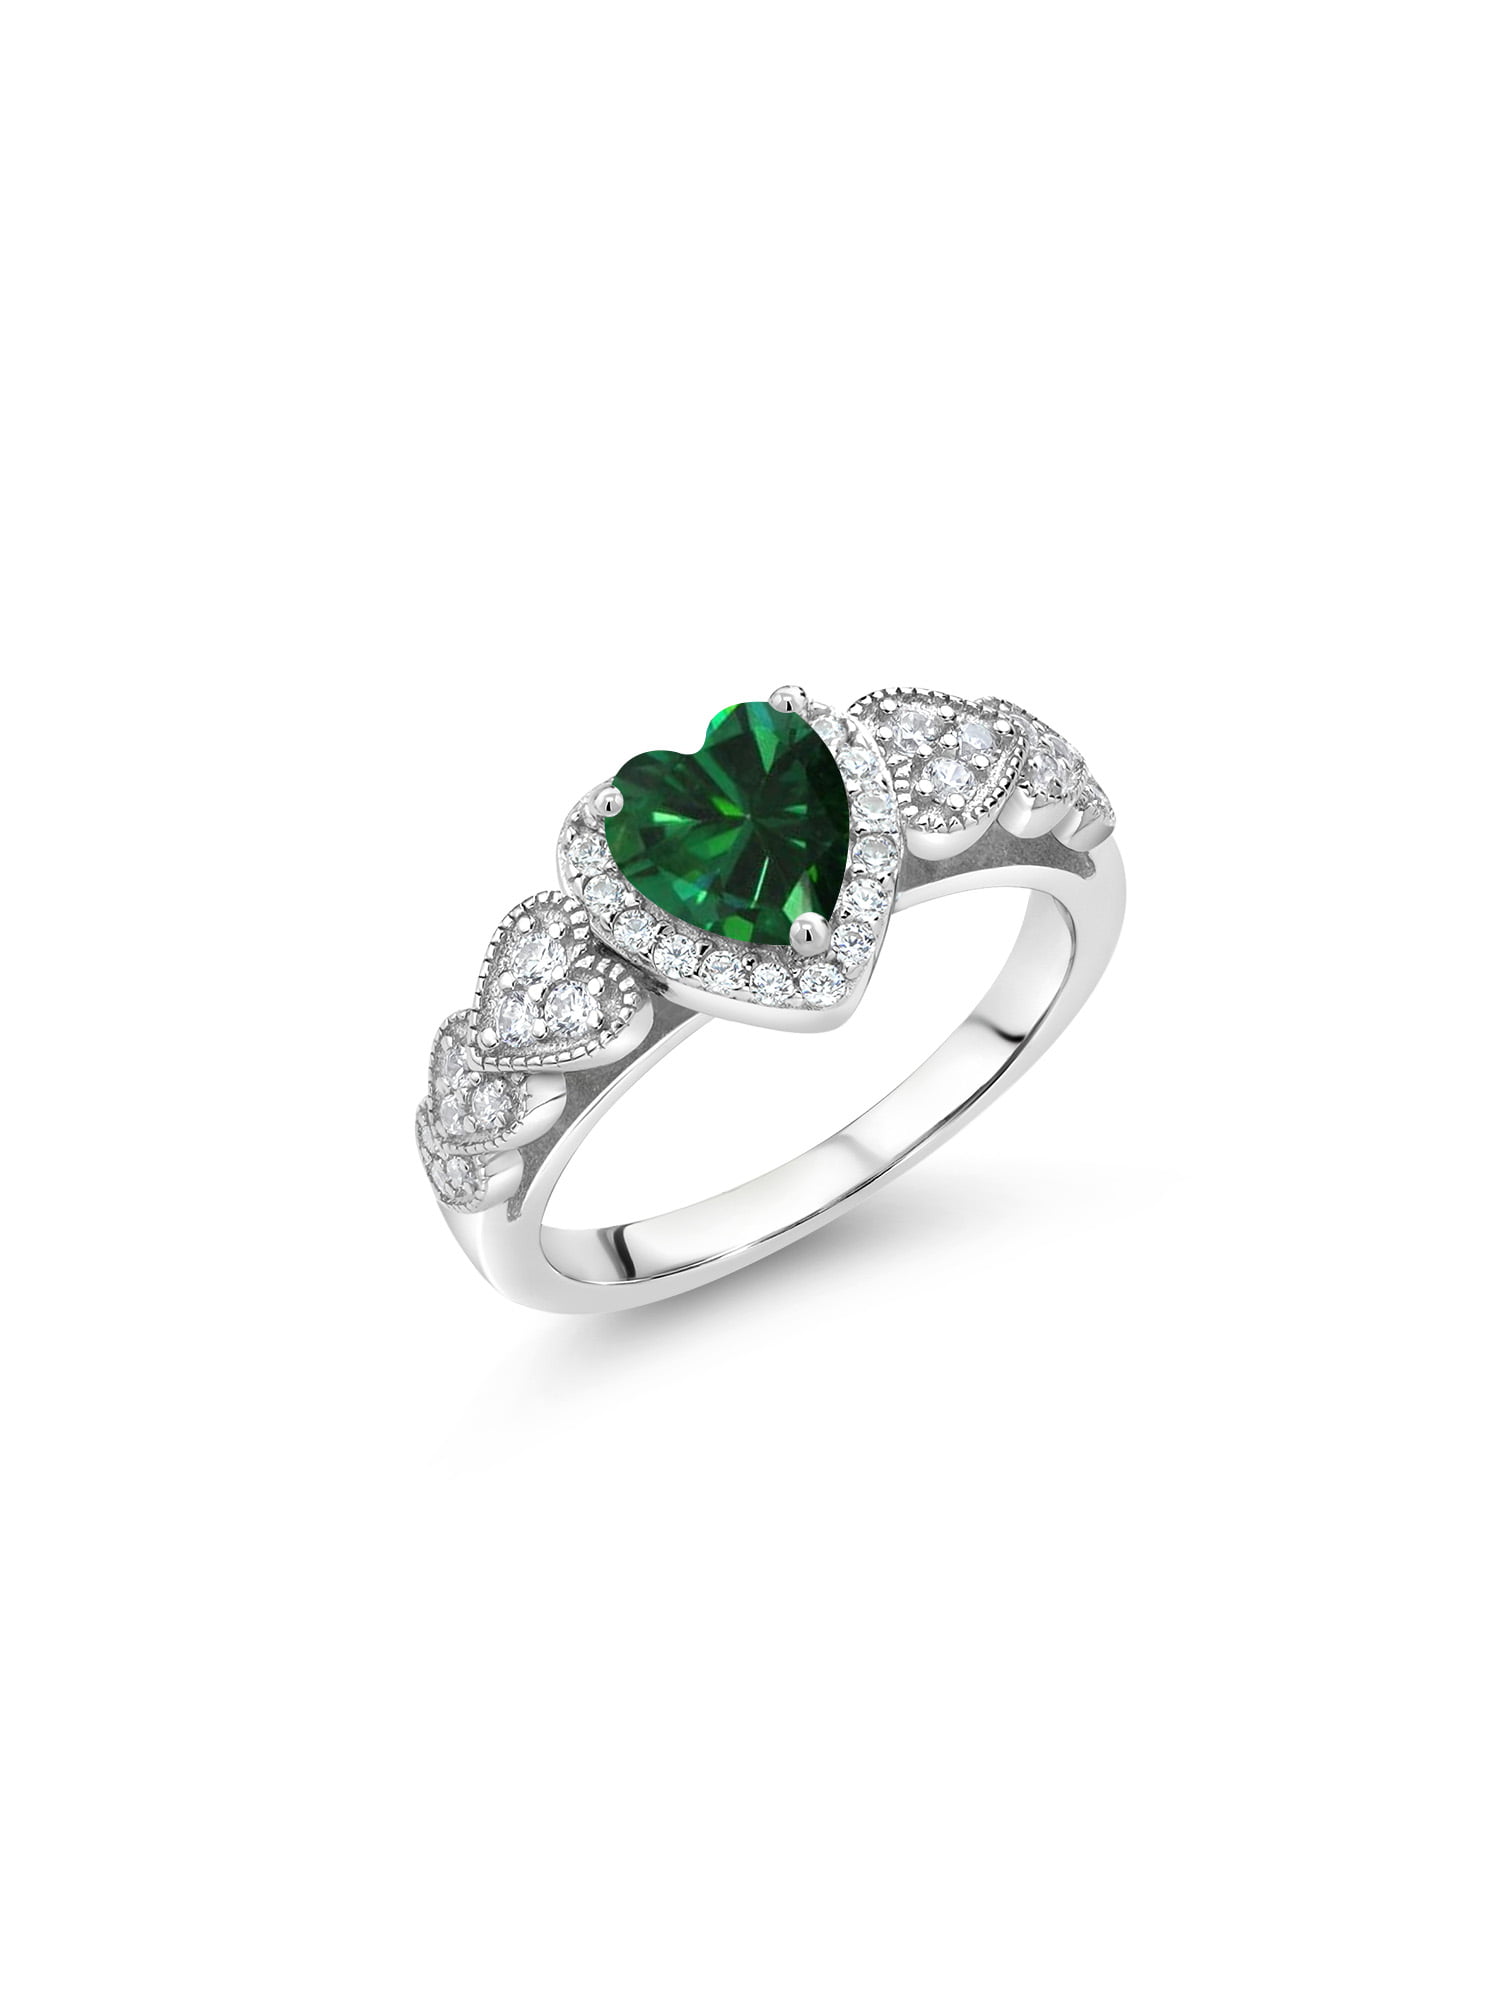 3.00 Carats Marquise Cut Simulated Emerald Ring Sterling Silver Sizes 5 to 9 